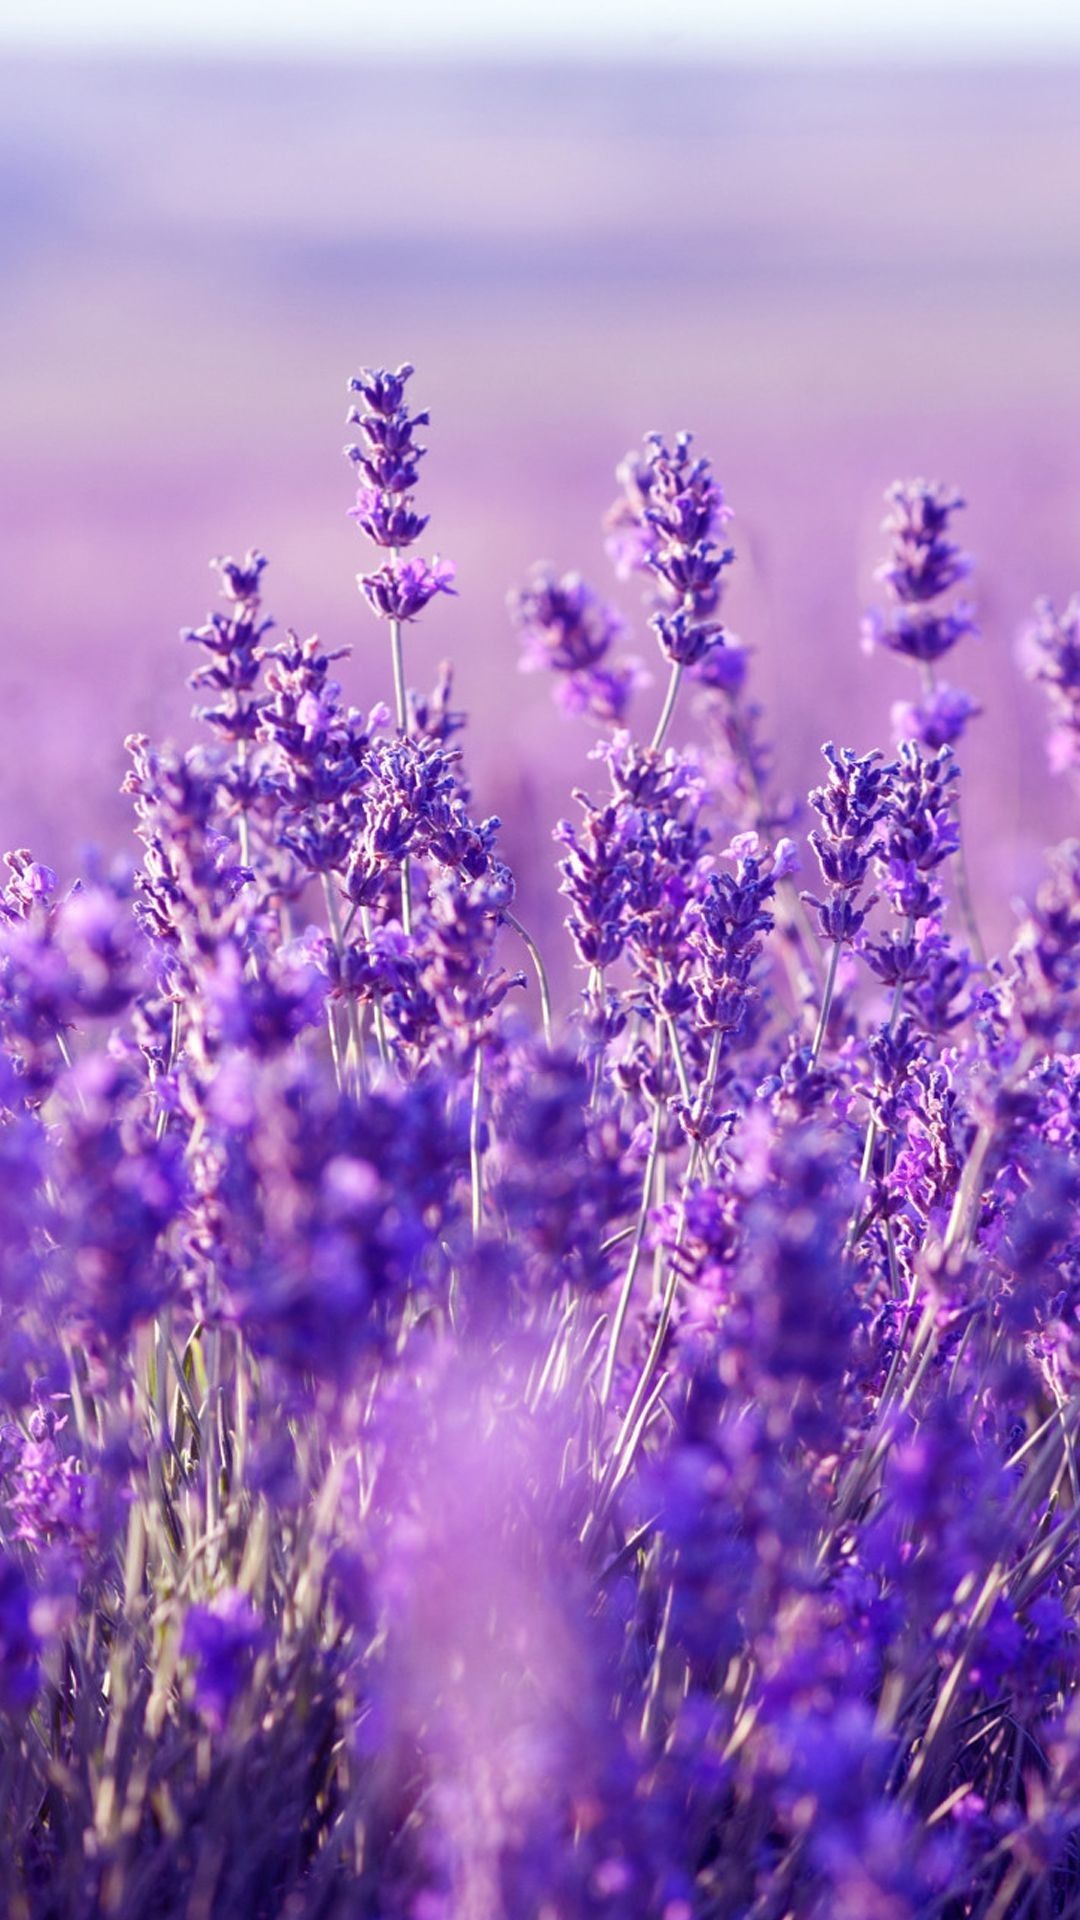 Iphone lavender aesthetic wallpapers